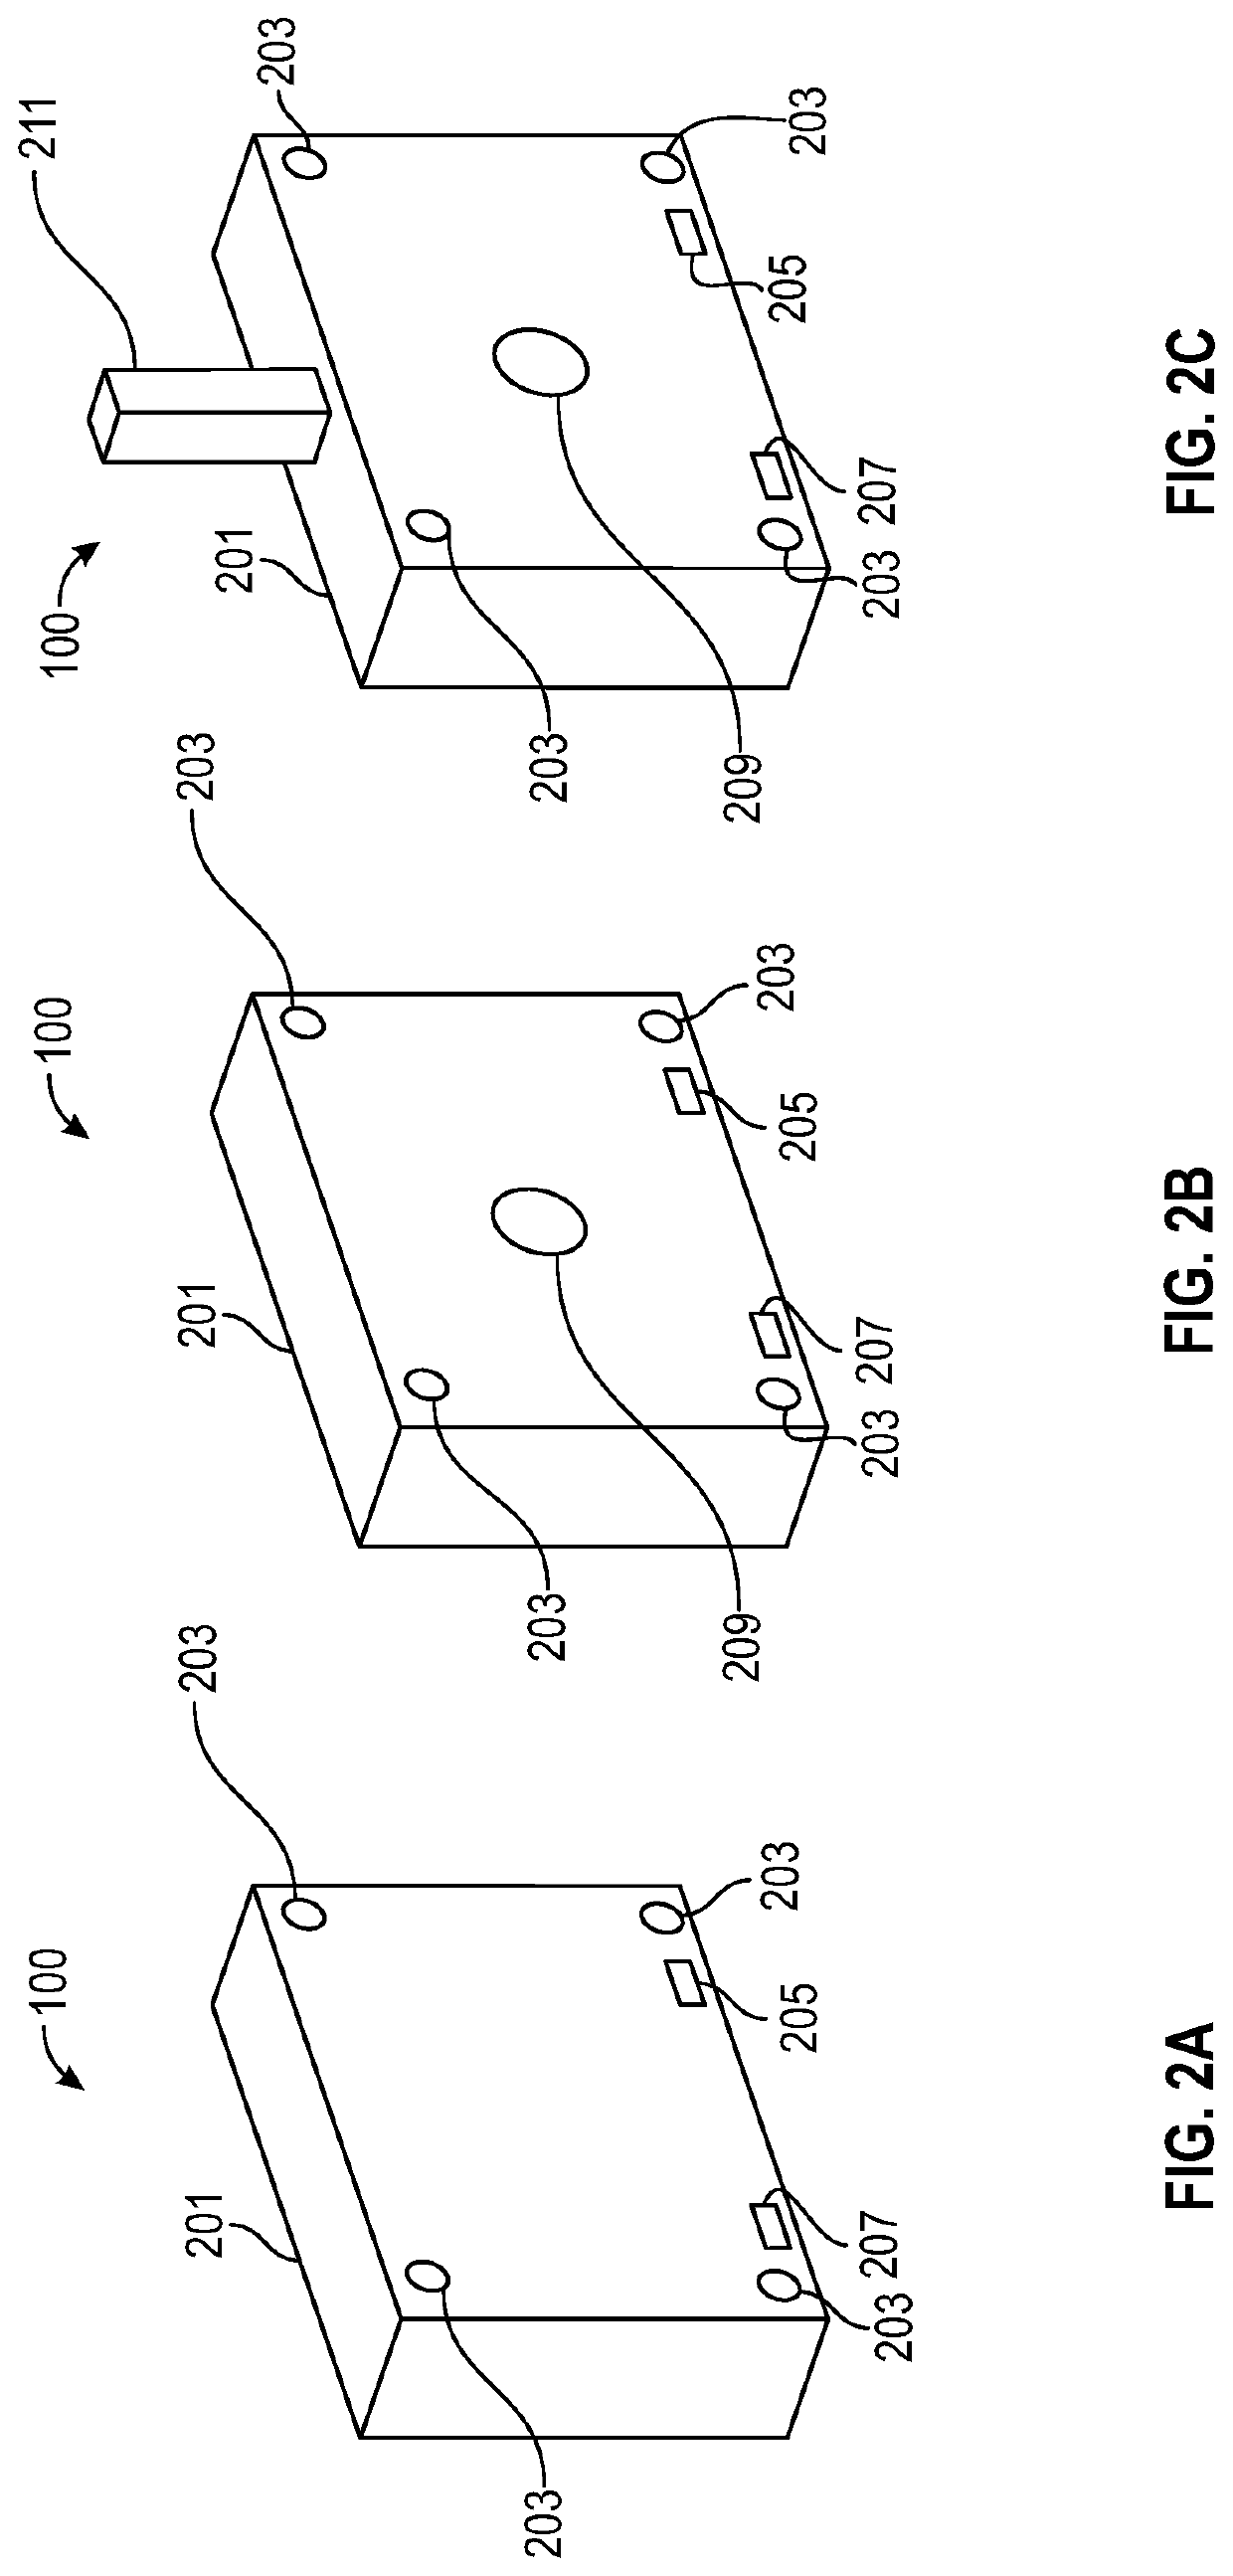 Devices, systems, and methods for monitoring controlled spaces for transitory uses